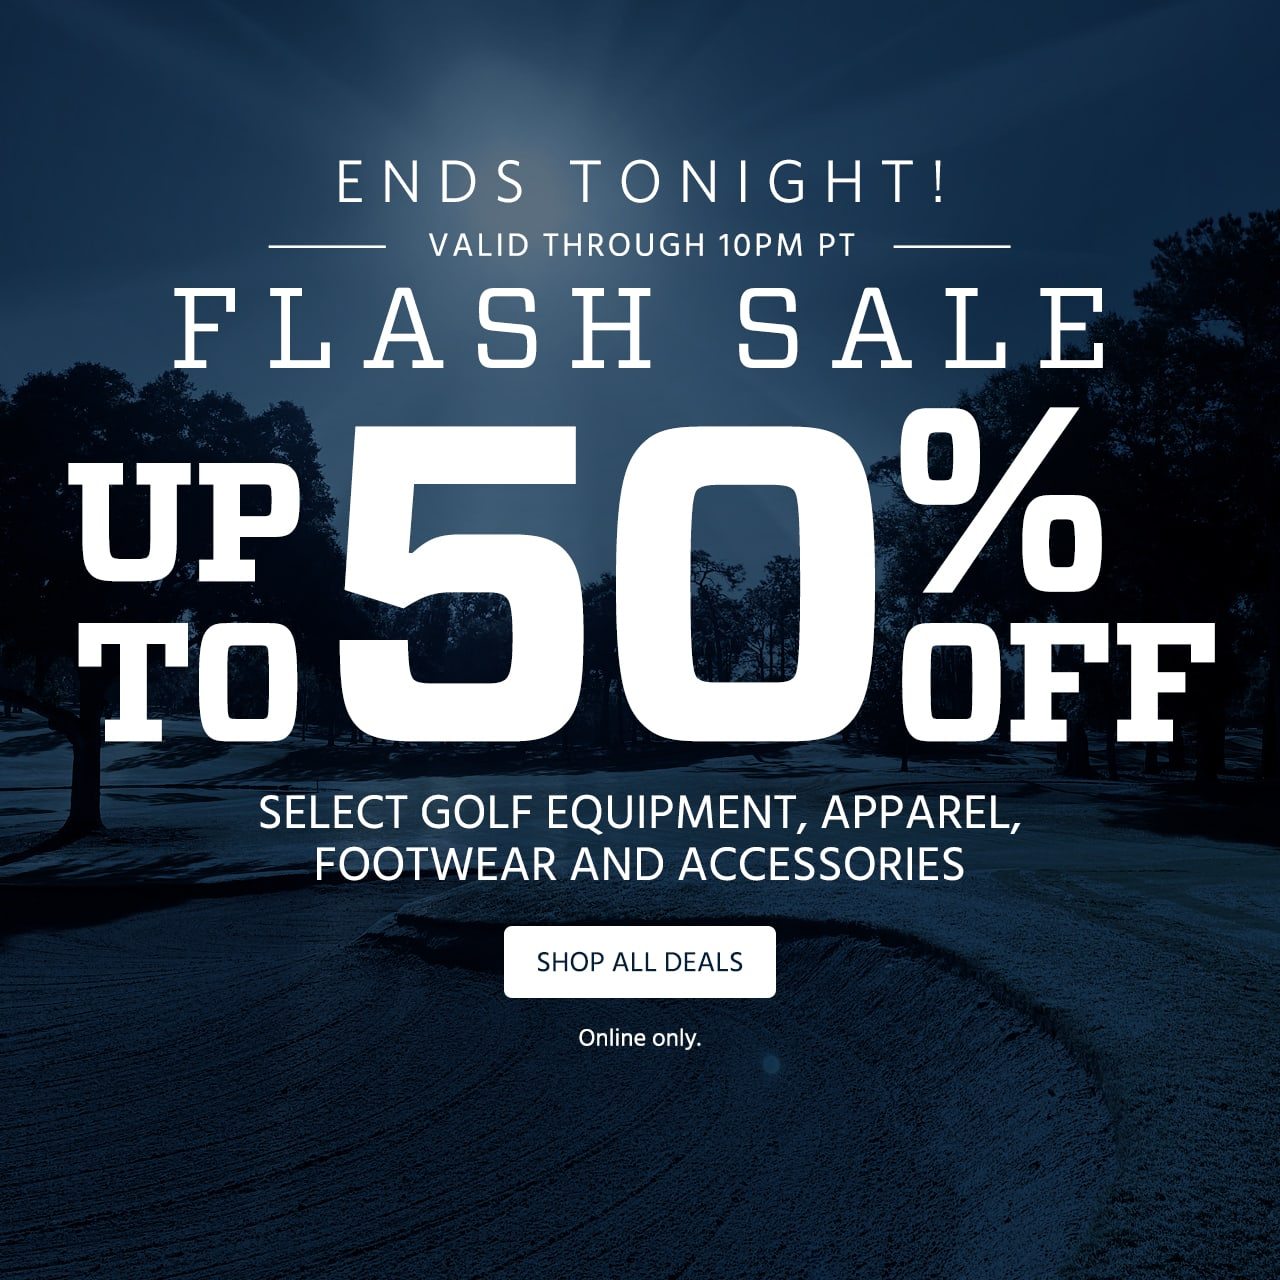 Ends Tonight! Valid Through 10PM PT. Flash Sale. Up to 50% off select golf equipment, apparel, footwear and accessories. Online only. Shop now.